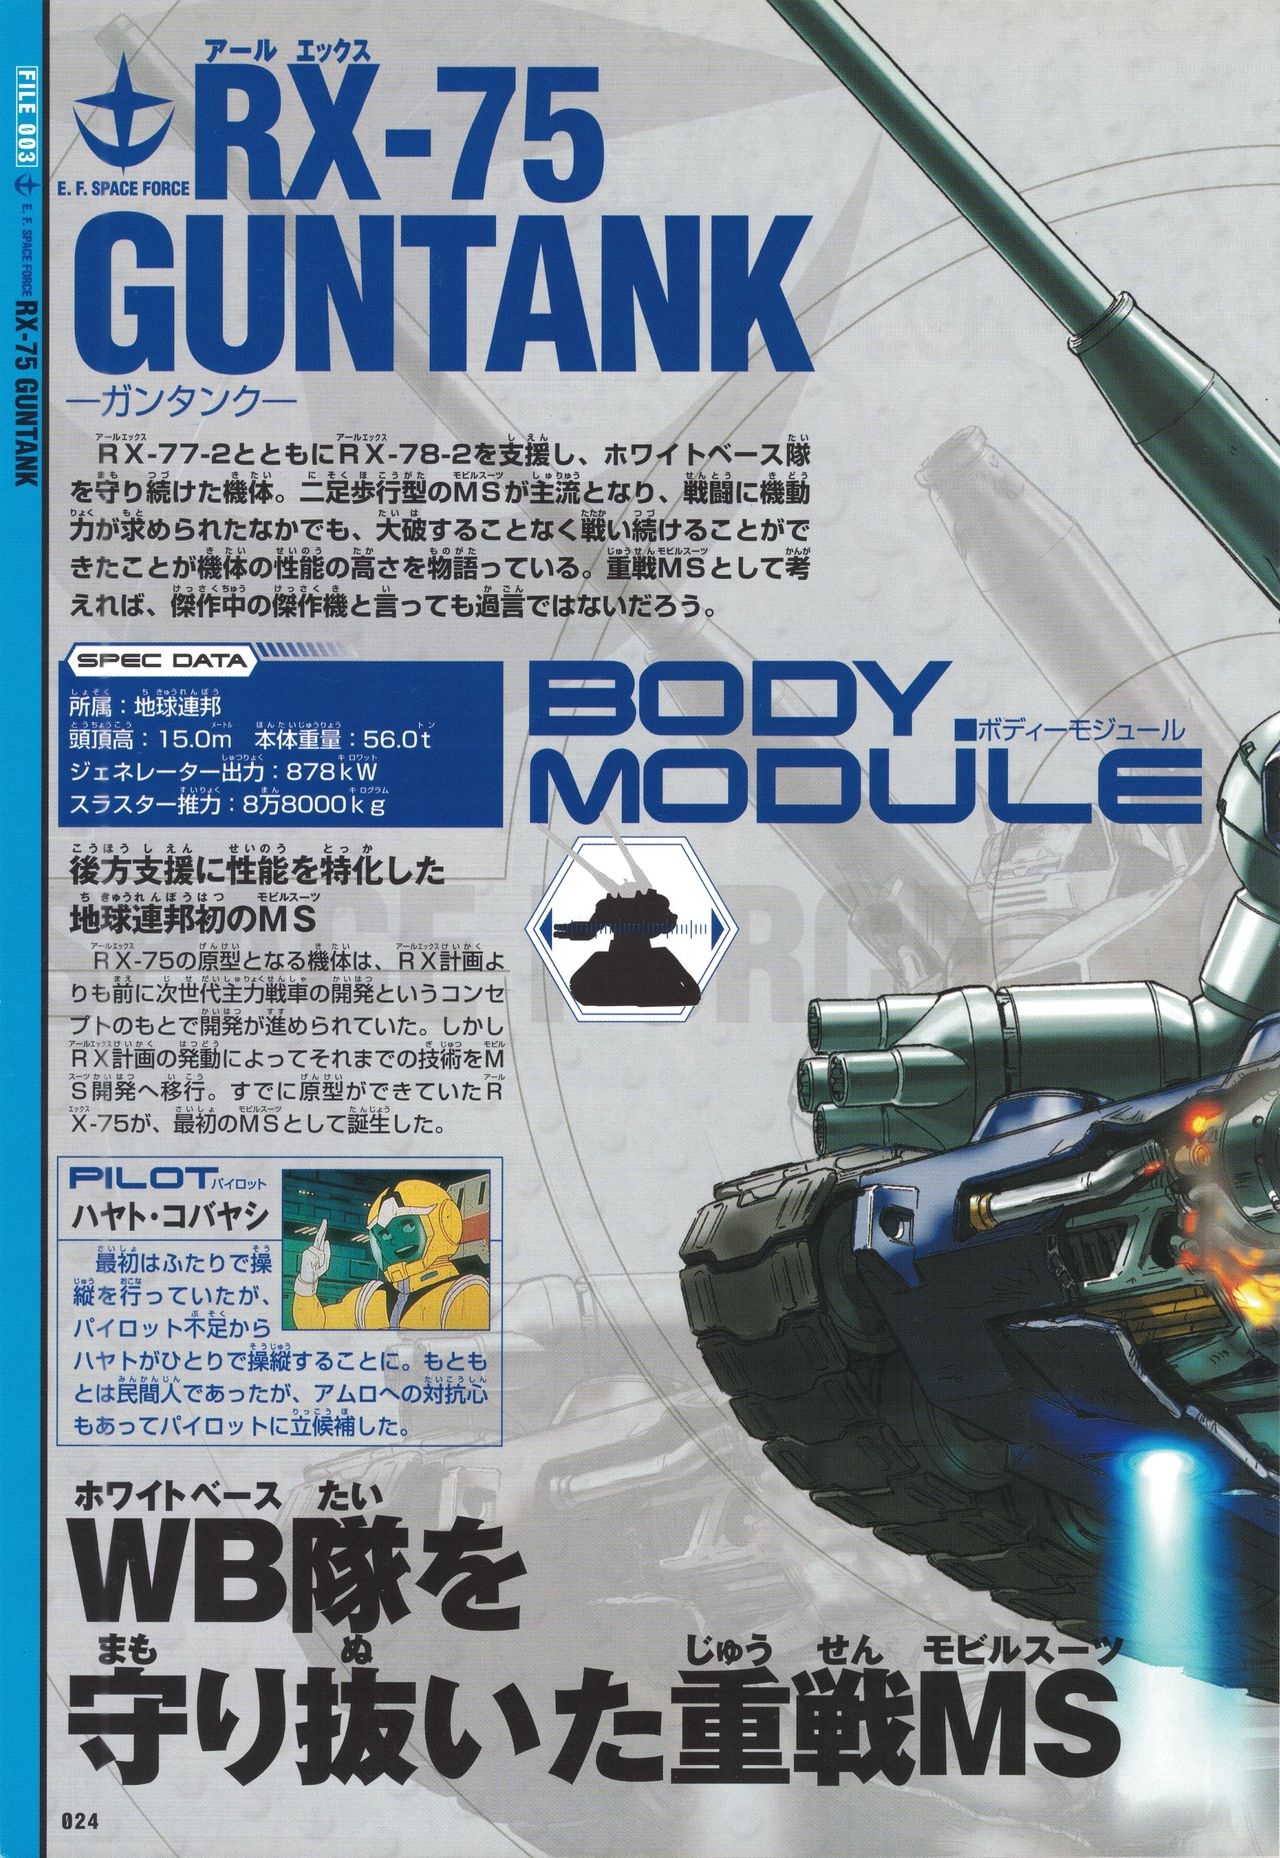 Mobile Suit Gundam - New Cross-Section Book - One Year War Edition 26